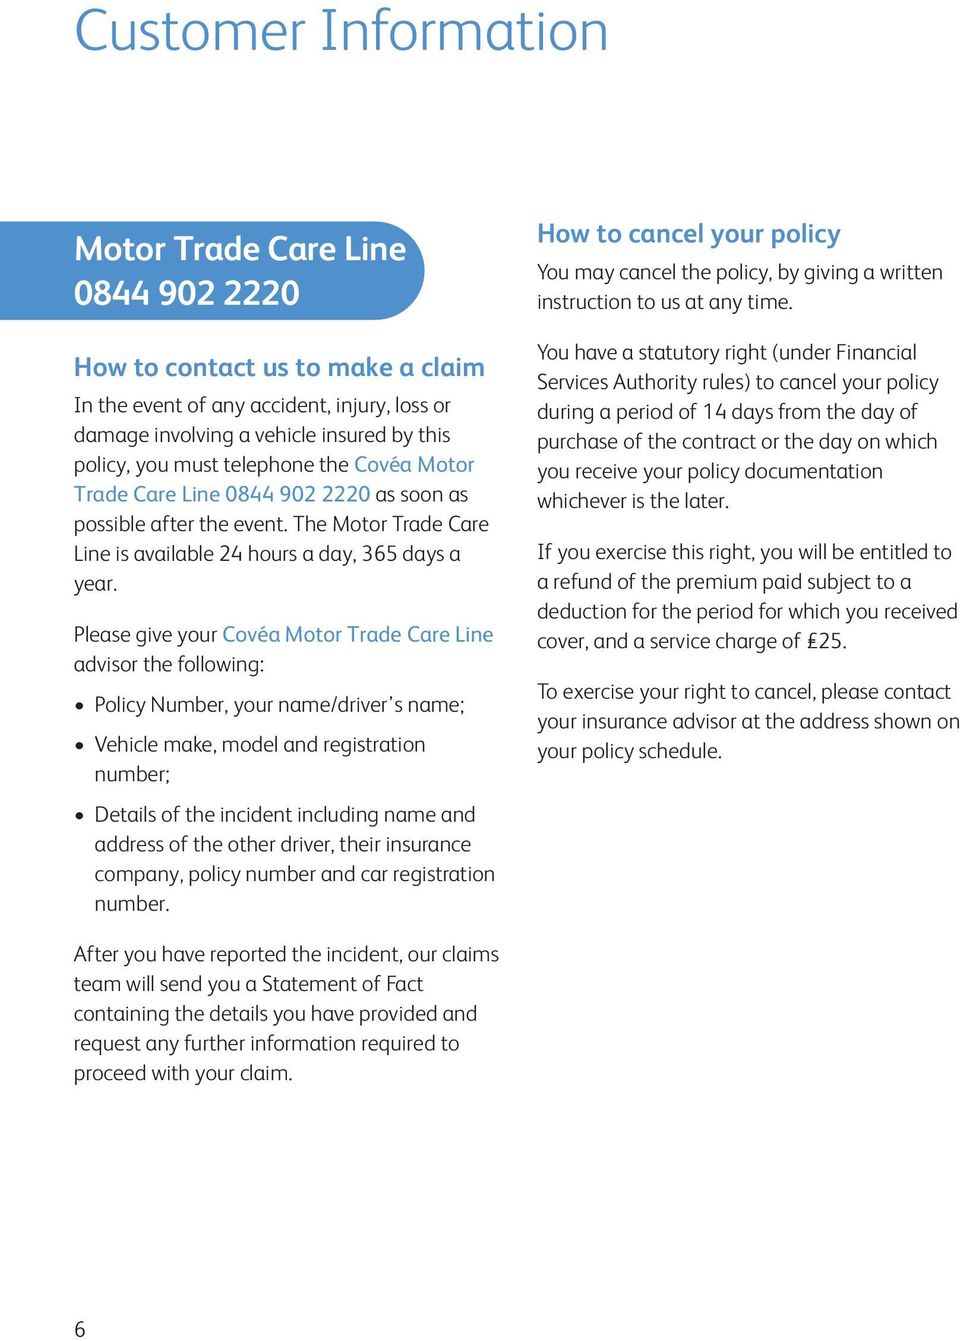 Please give your Covéa Motor Trade Care Line advisor the following: Policy Number, your name/driver s name; Vehicle make, model and registration number; Details of the incident including name and